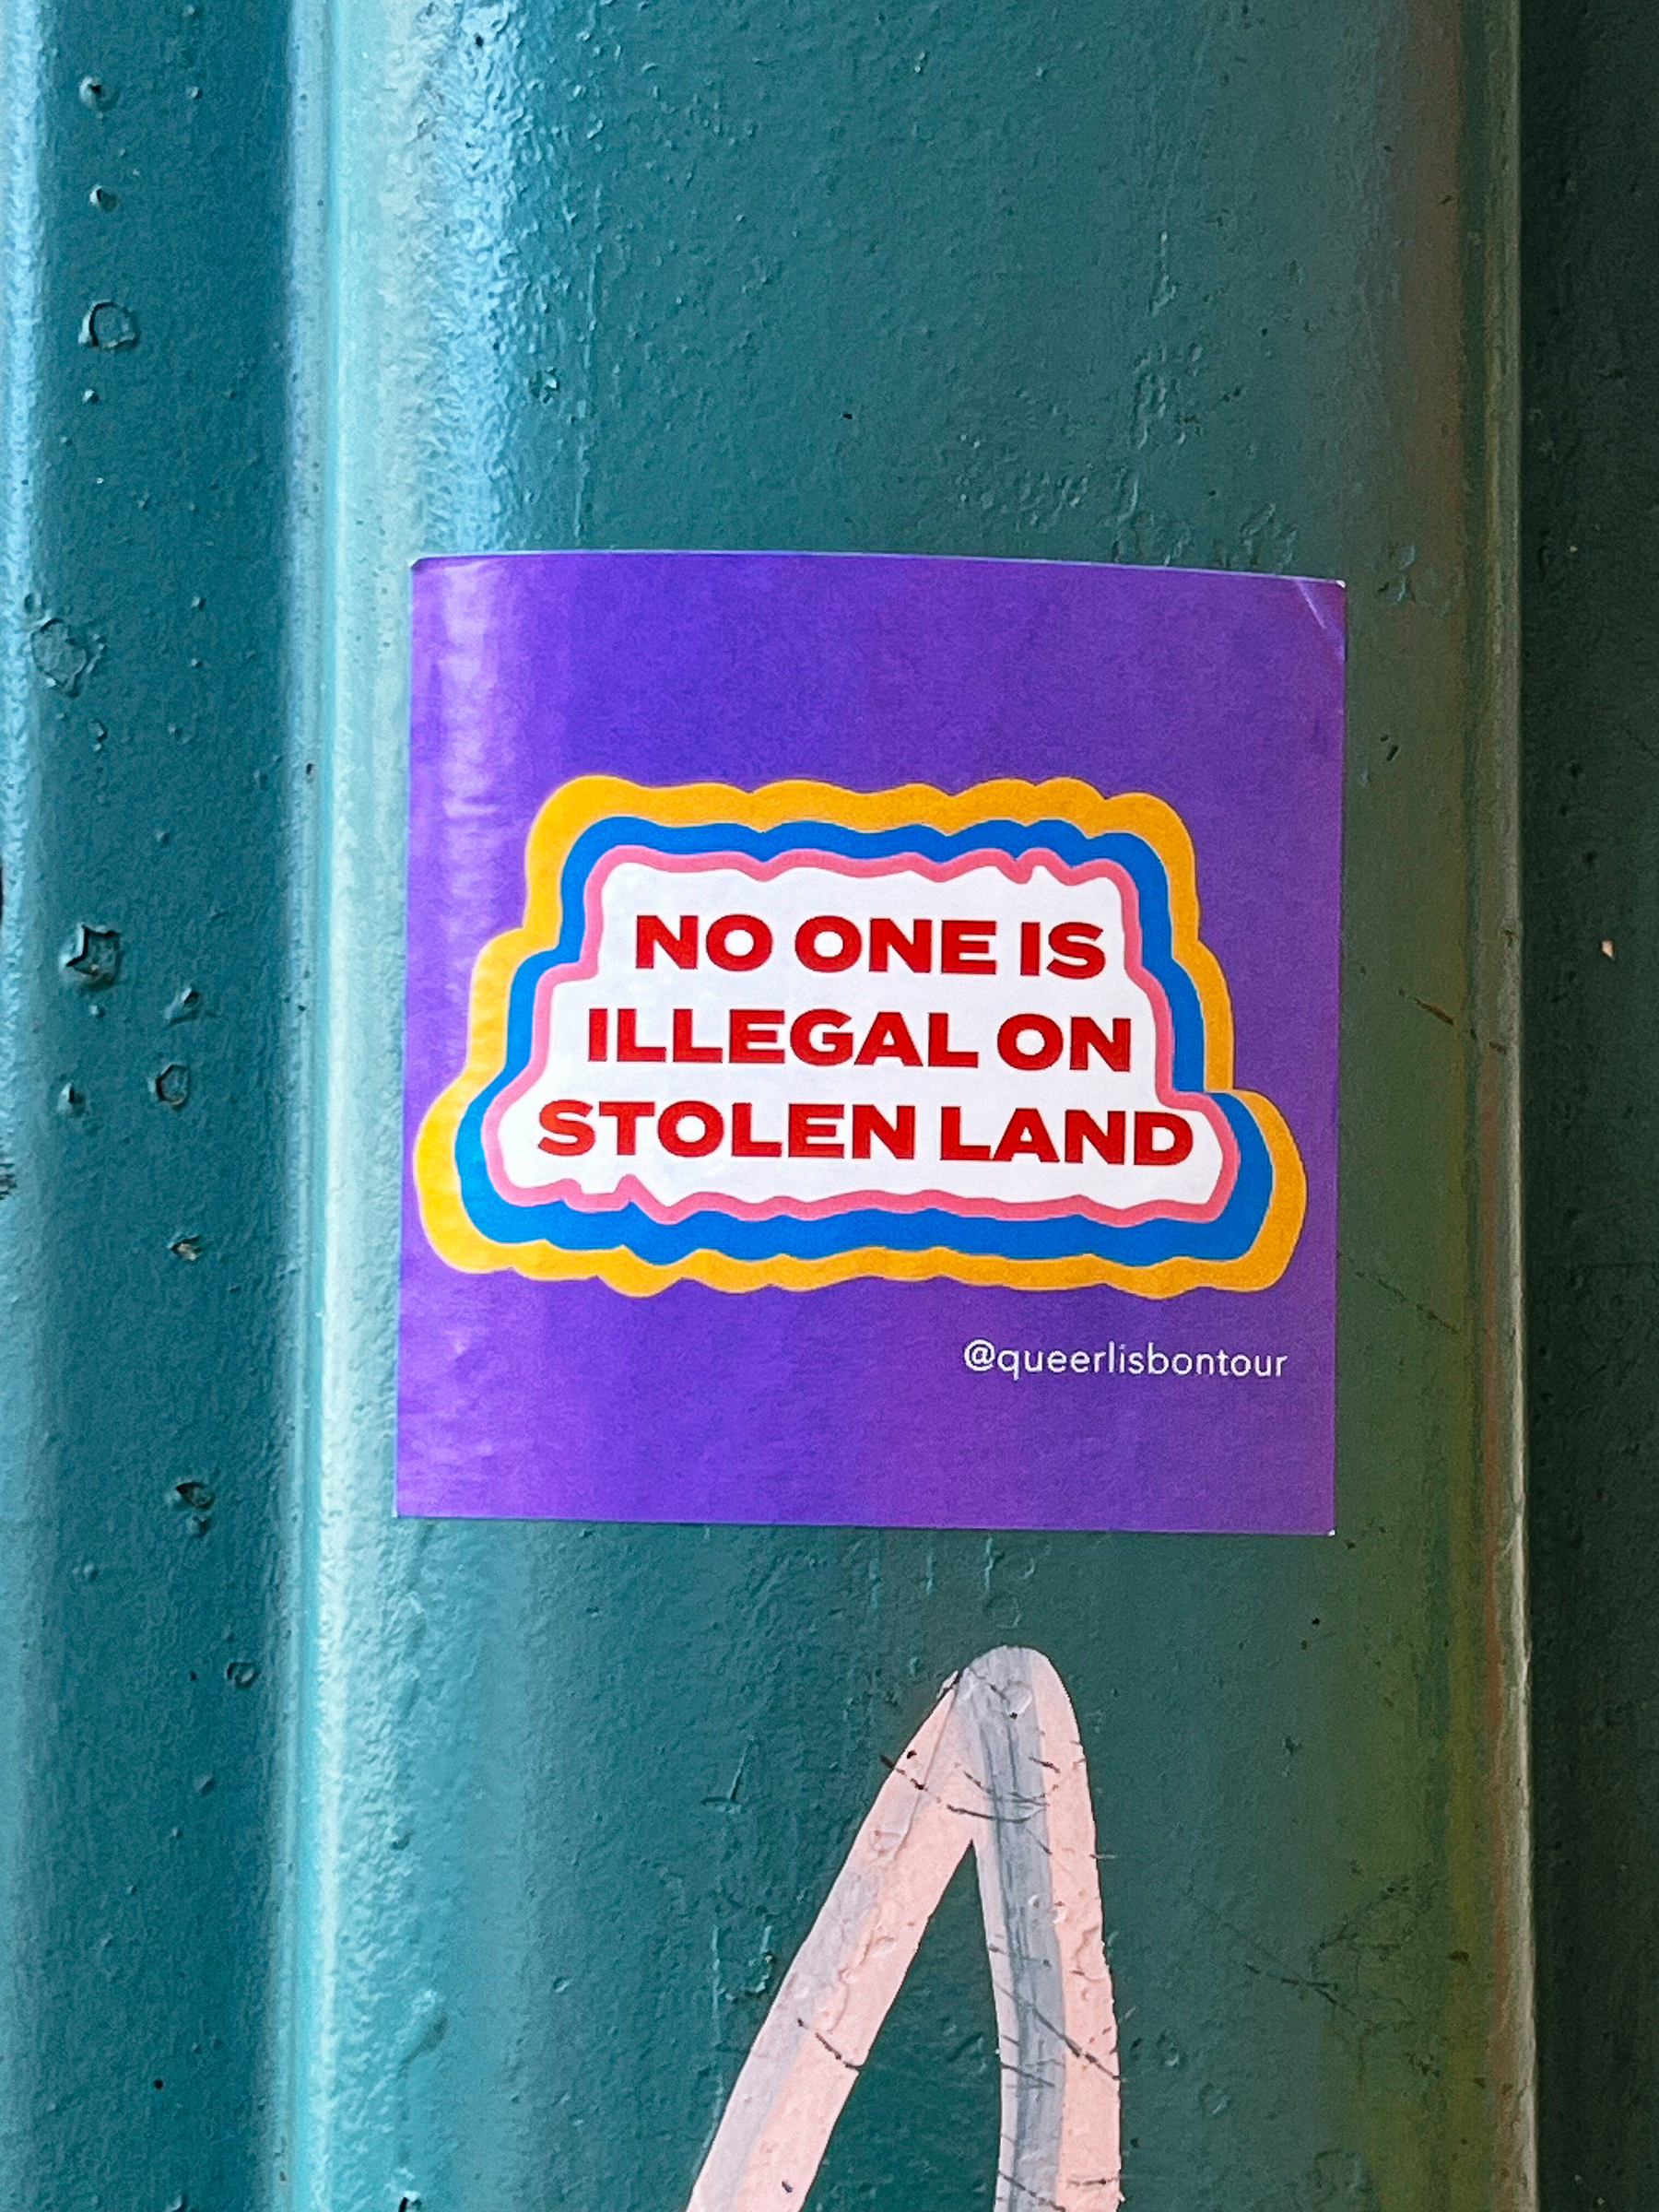 A purple sticker with yellow and red borders displays the text &ldquo;NO ONE IS ILLEGAL ON STOLEN LAND @queerlisbontour&rdquo; affixed to a green metal pole.